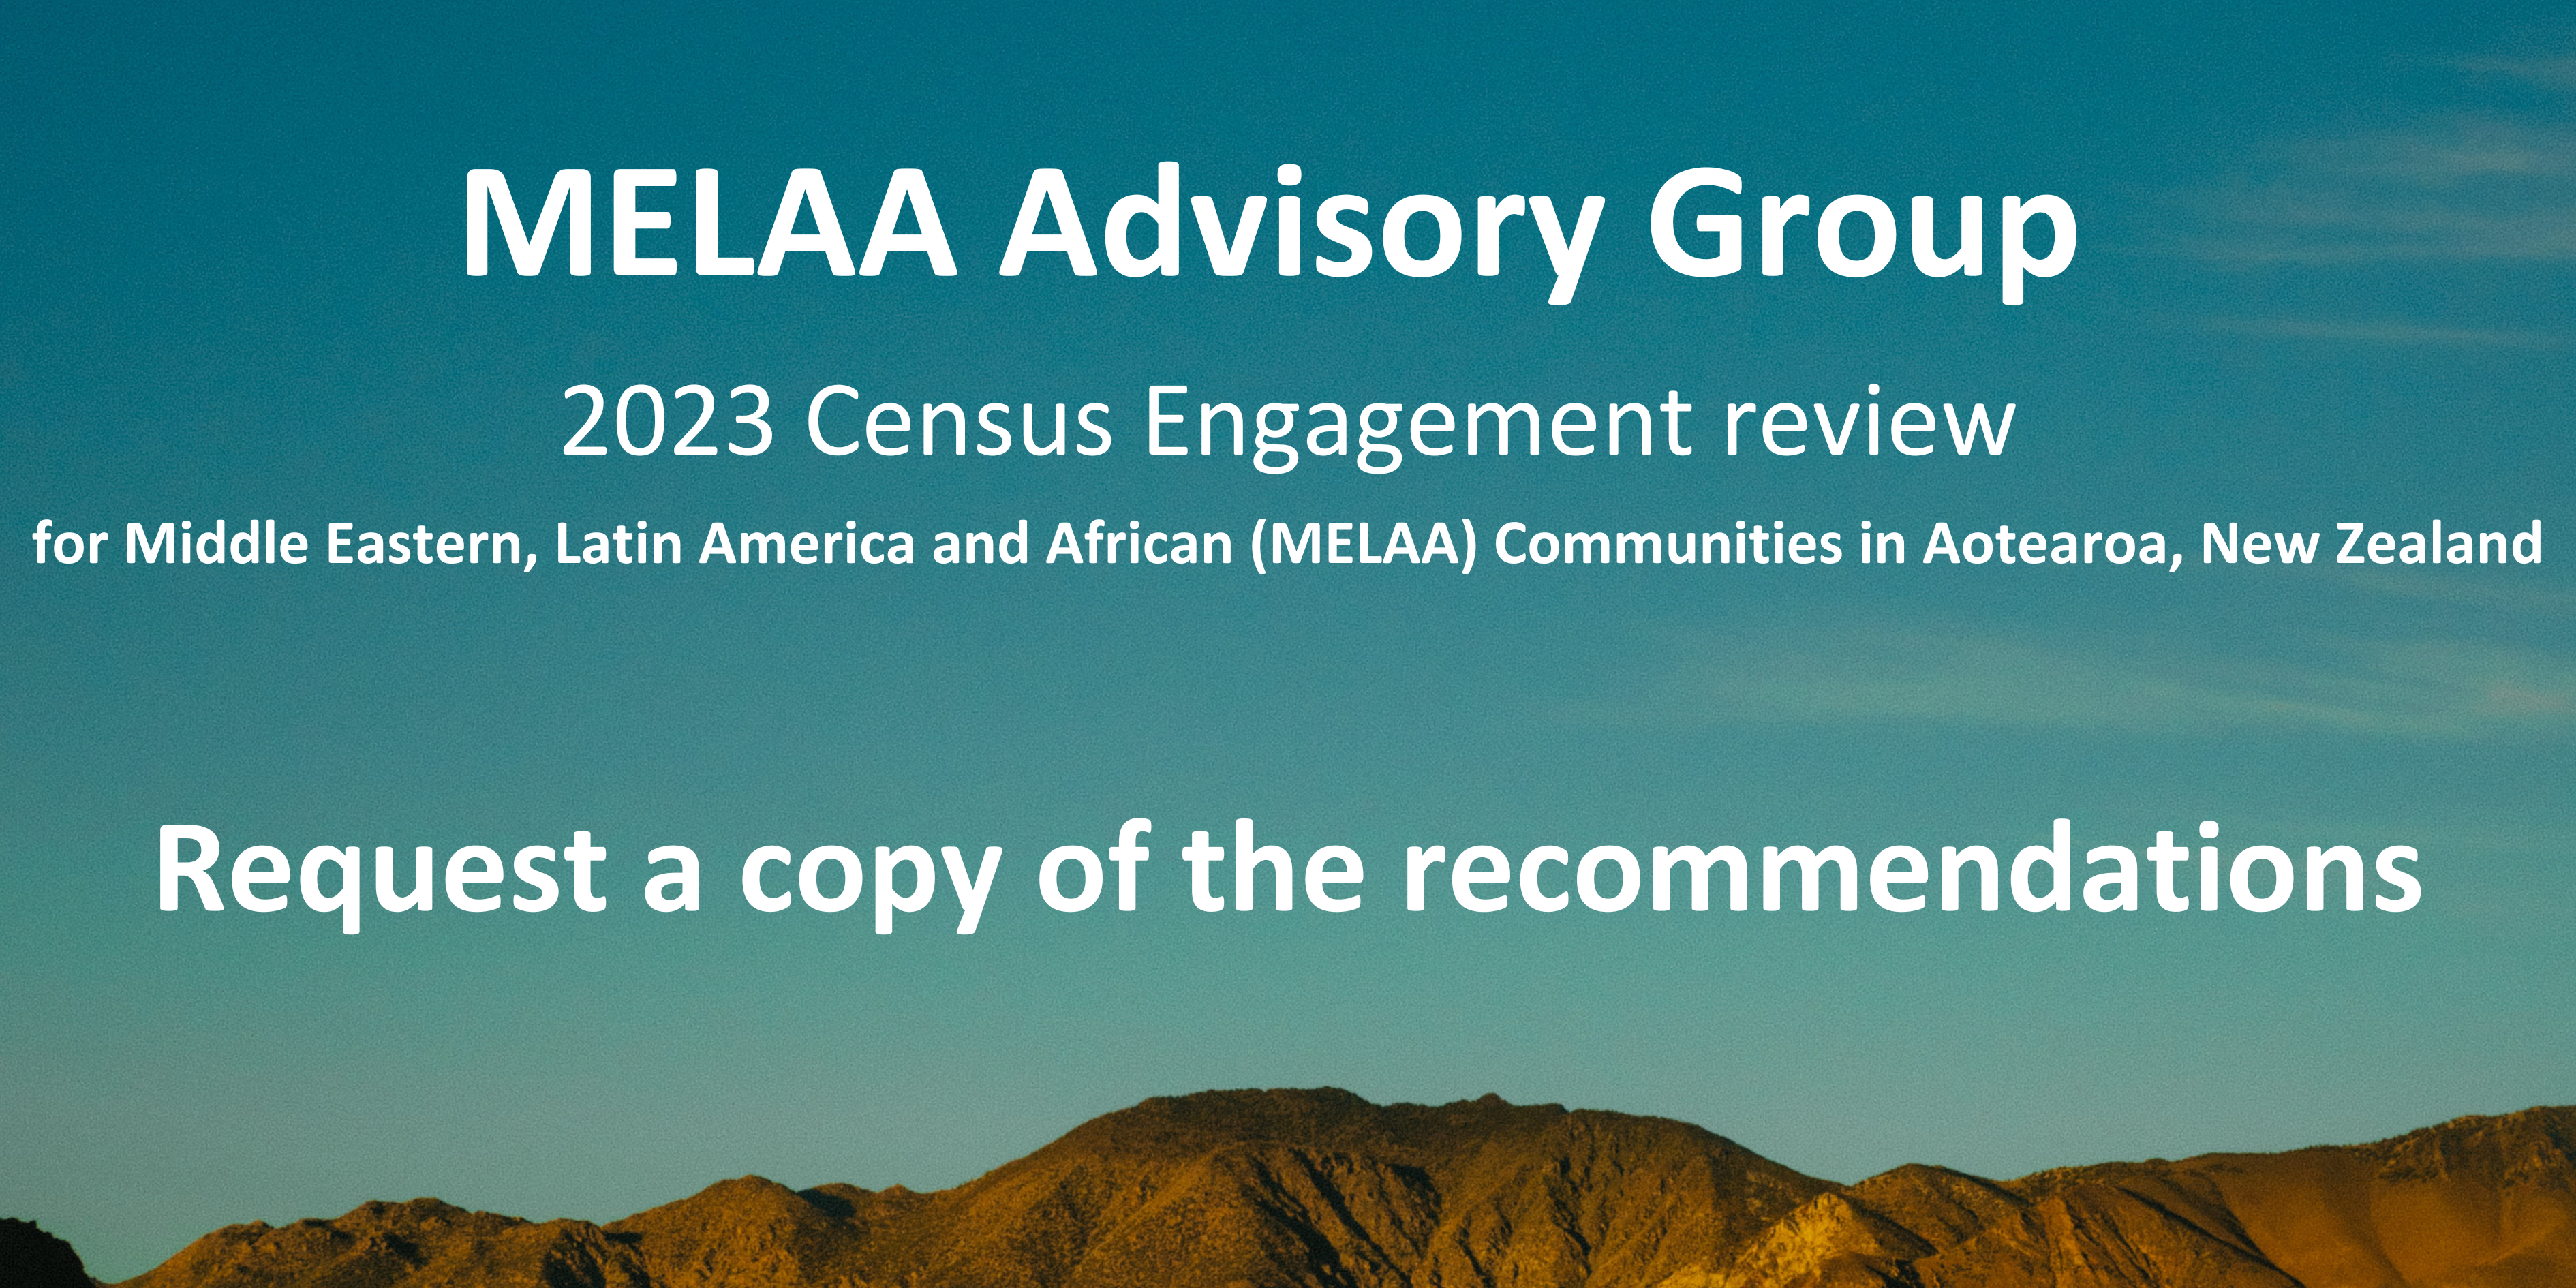 MELAA Advisory Group 2023 Census Engagement review for Middle Eastern, Latin America and African (MELAA) Communities in Aotearoa, New Zealand